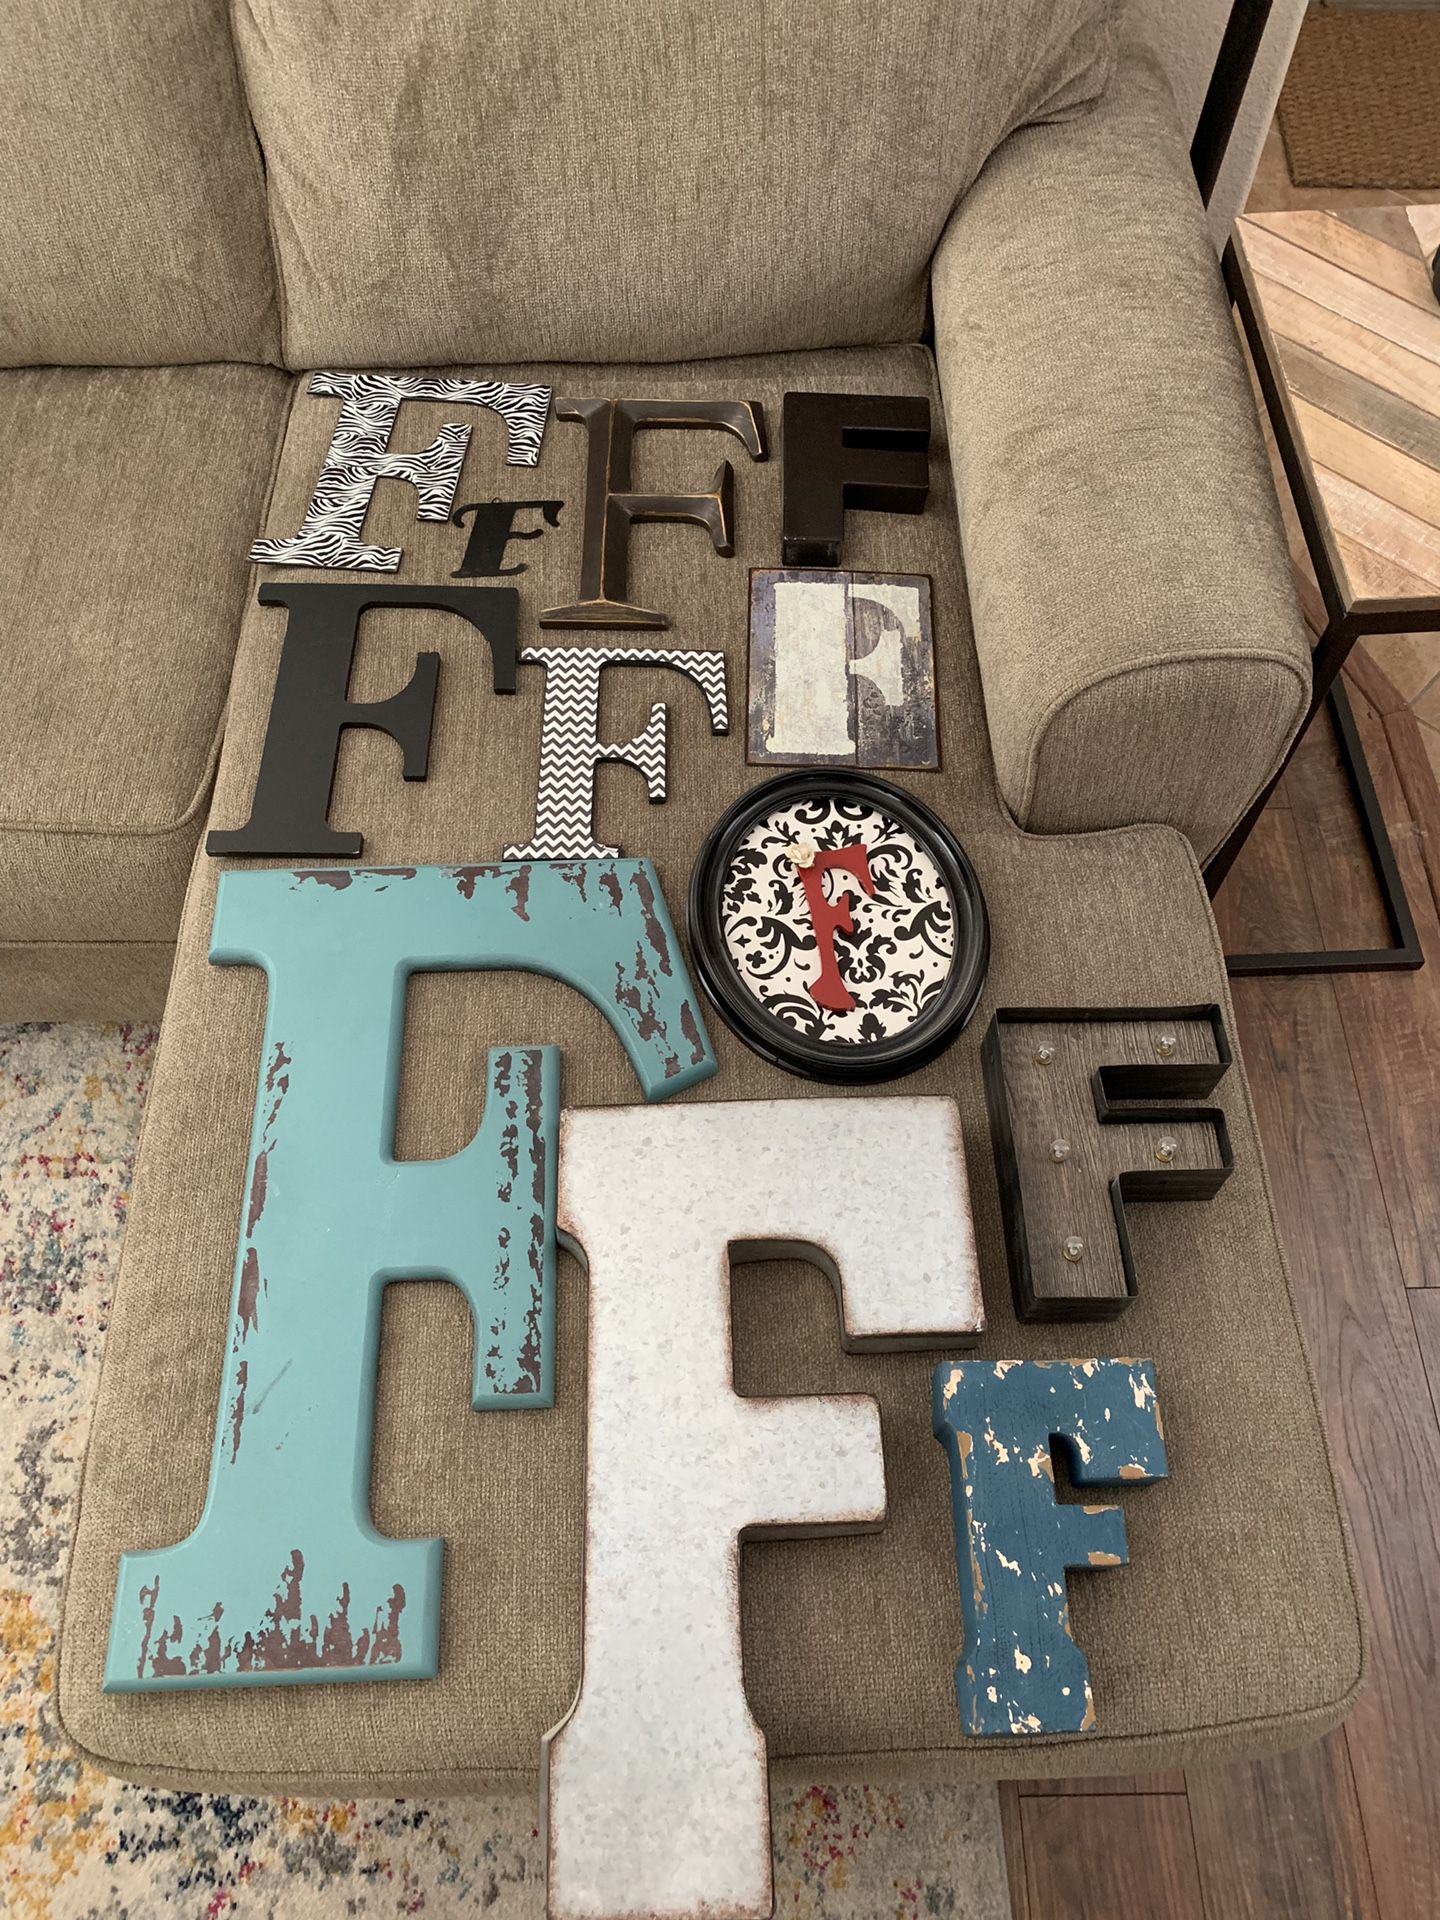 What the “F”? 12 Decretive Letter F’s